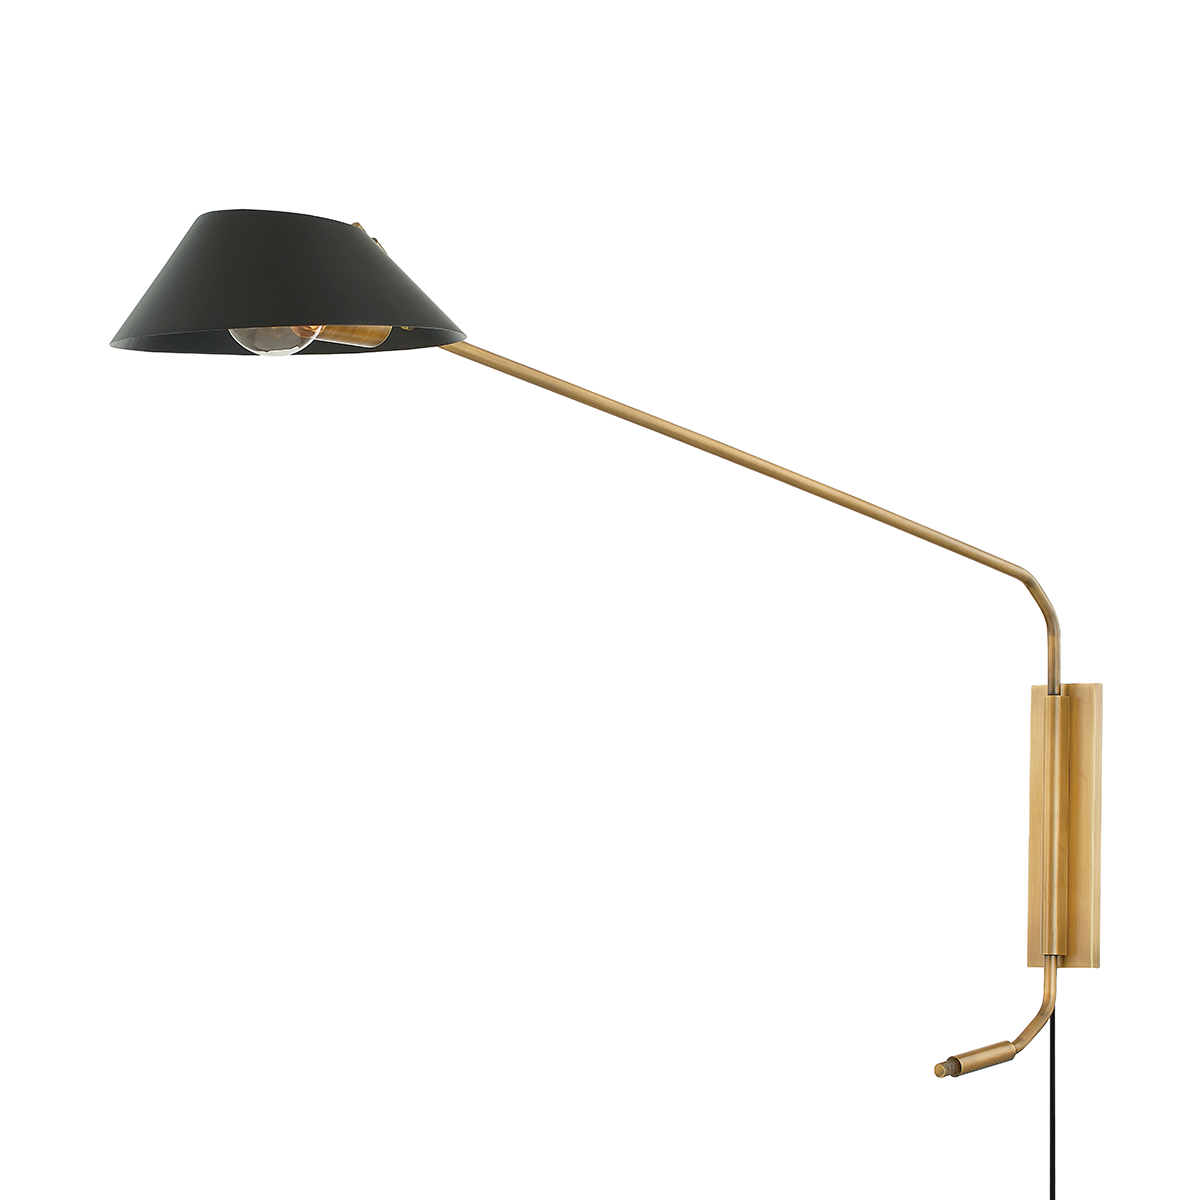 Patina Brass Arm with Metal Shade Plug In Wall Sconce